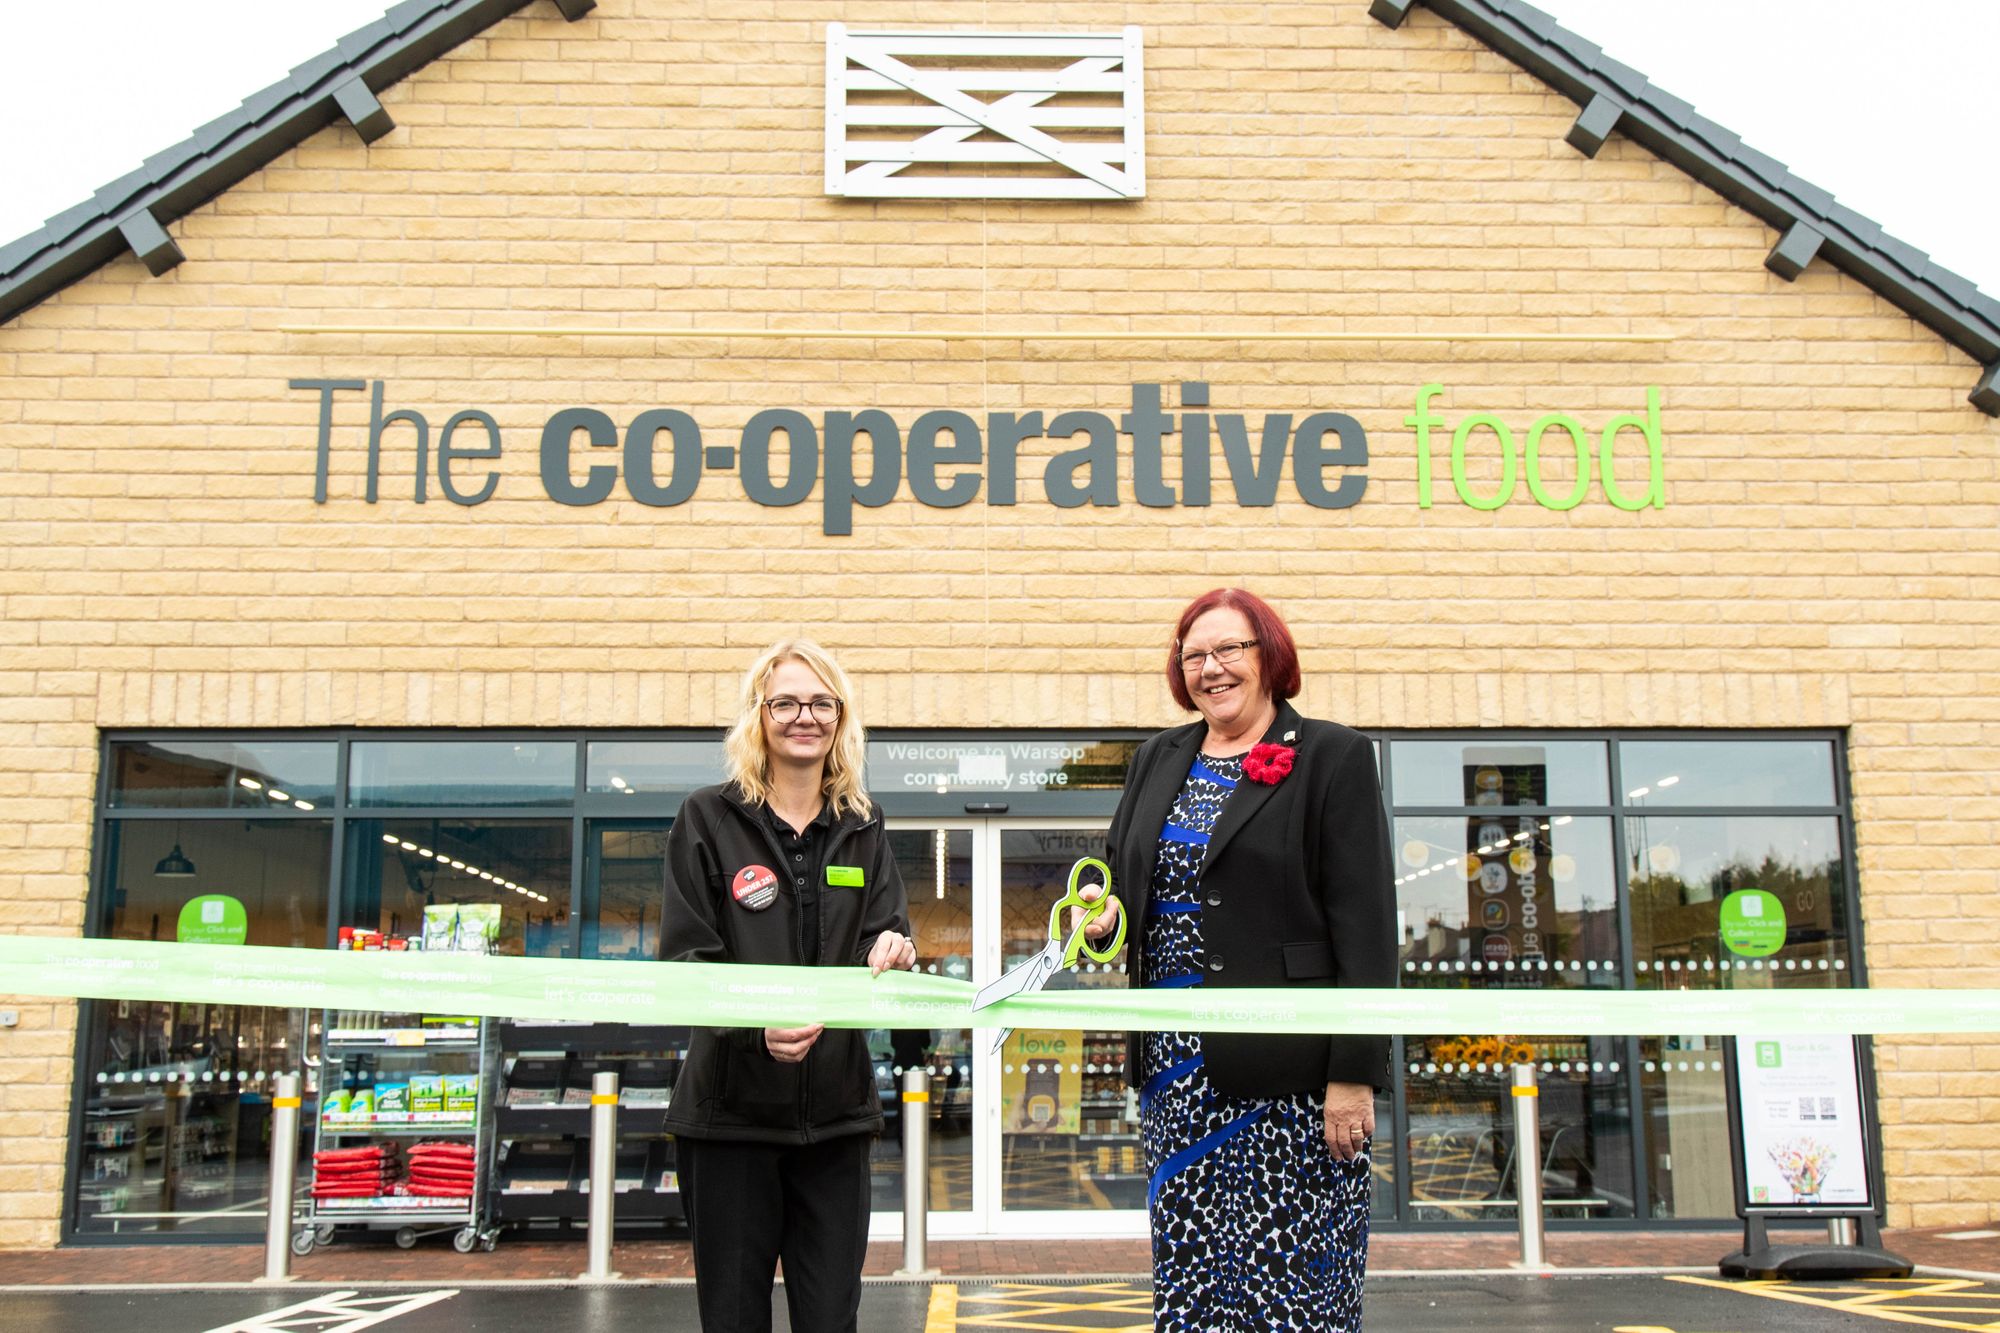 Central England Co-op officially opens new £1.85m store to support Nottinghamshire community - creating 15 new jobs